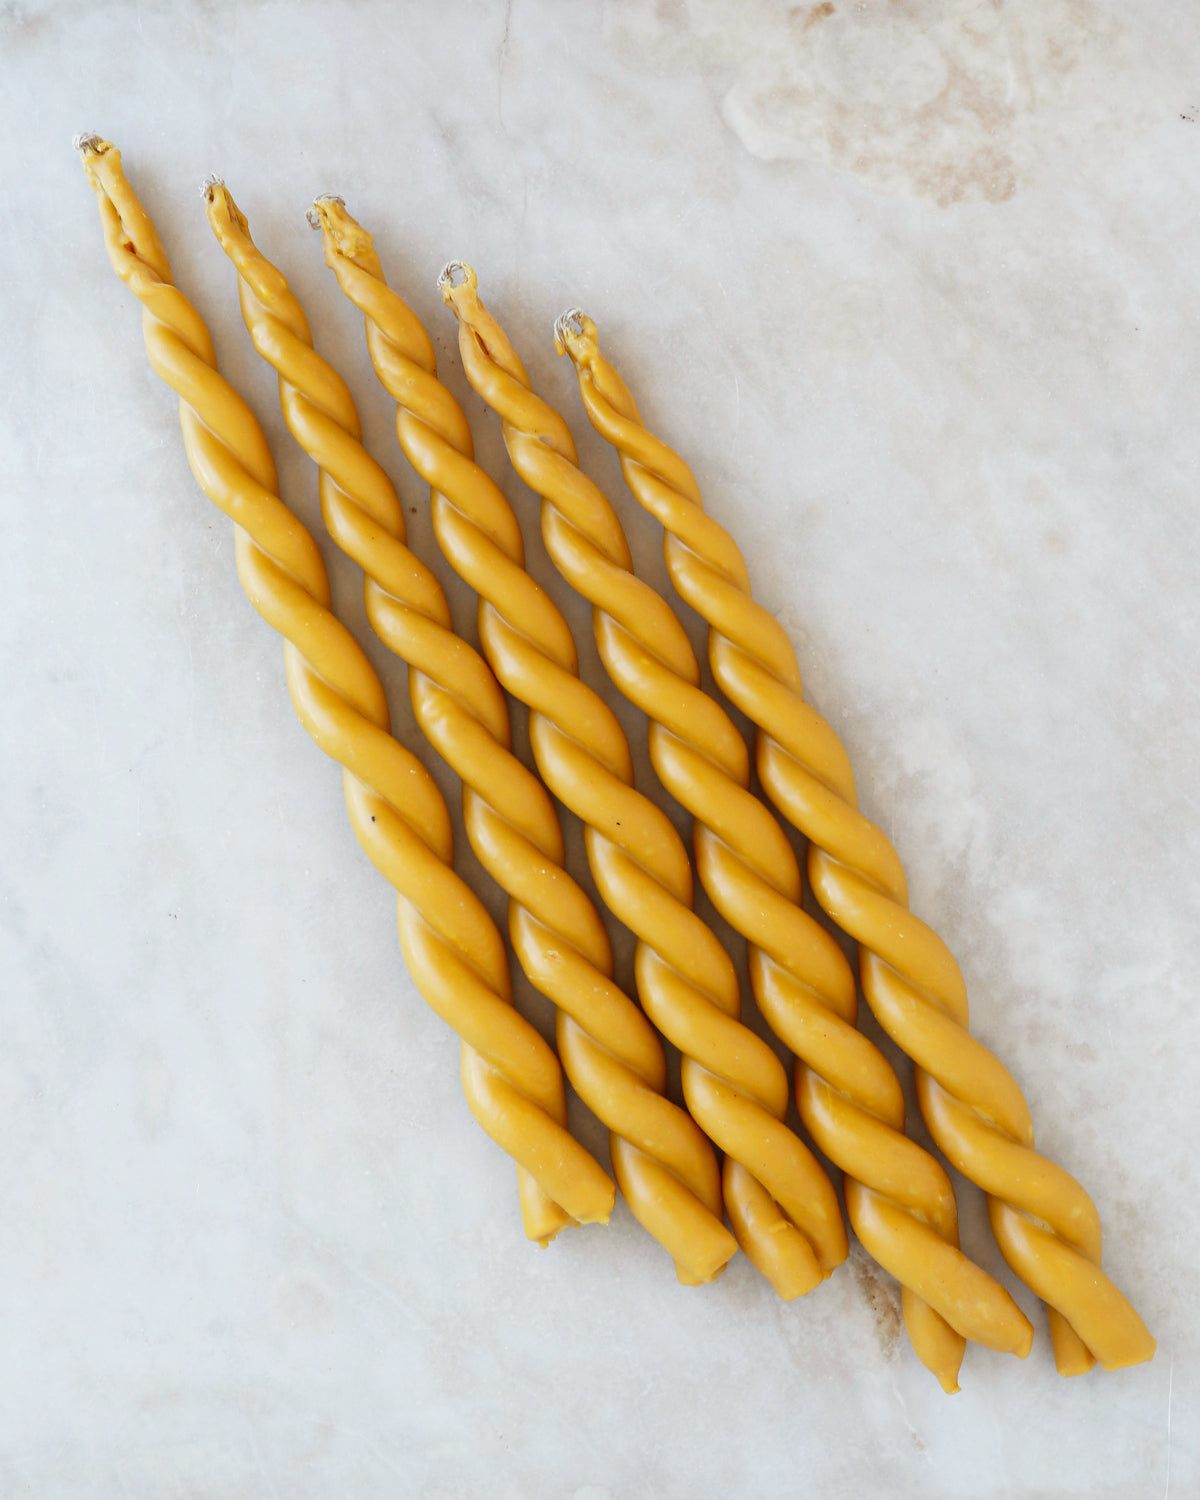 Large twisted handmade golden beeswax candles